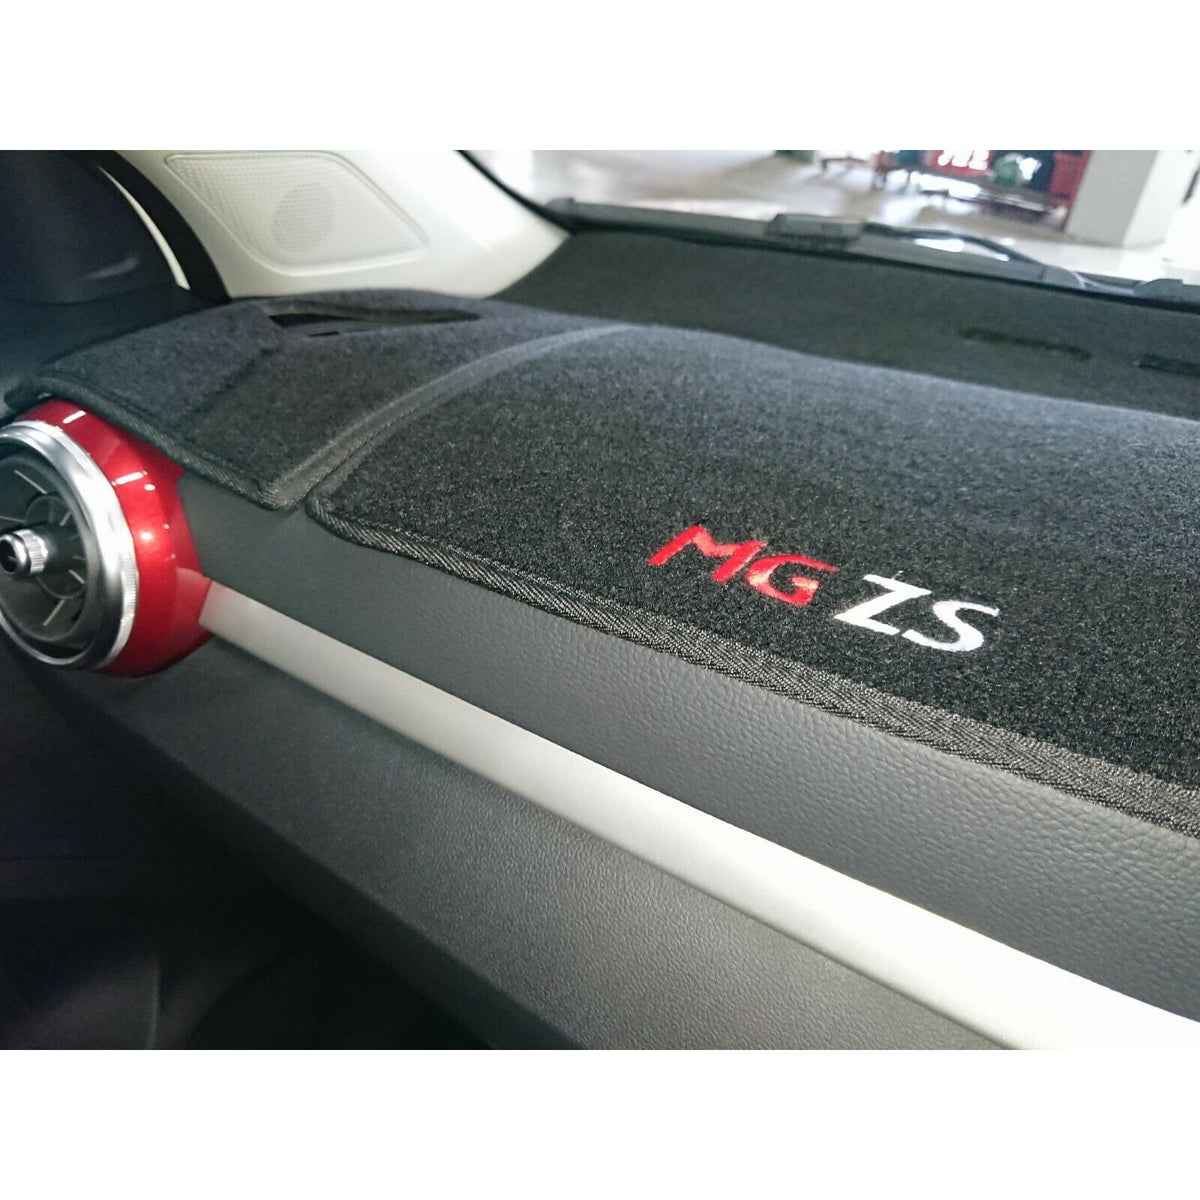 MG ZS, MG ZST, MG ZSEV Genuine Dashboard Mats- Black With Logo | ARG Parts & Accessories.